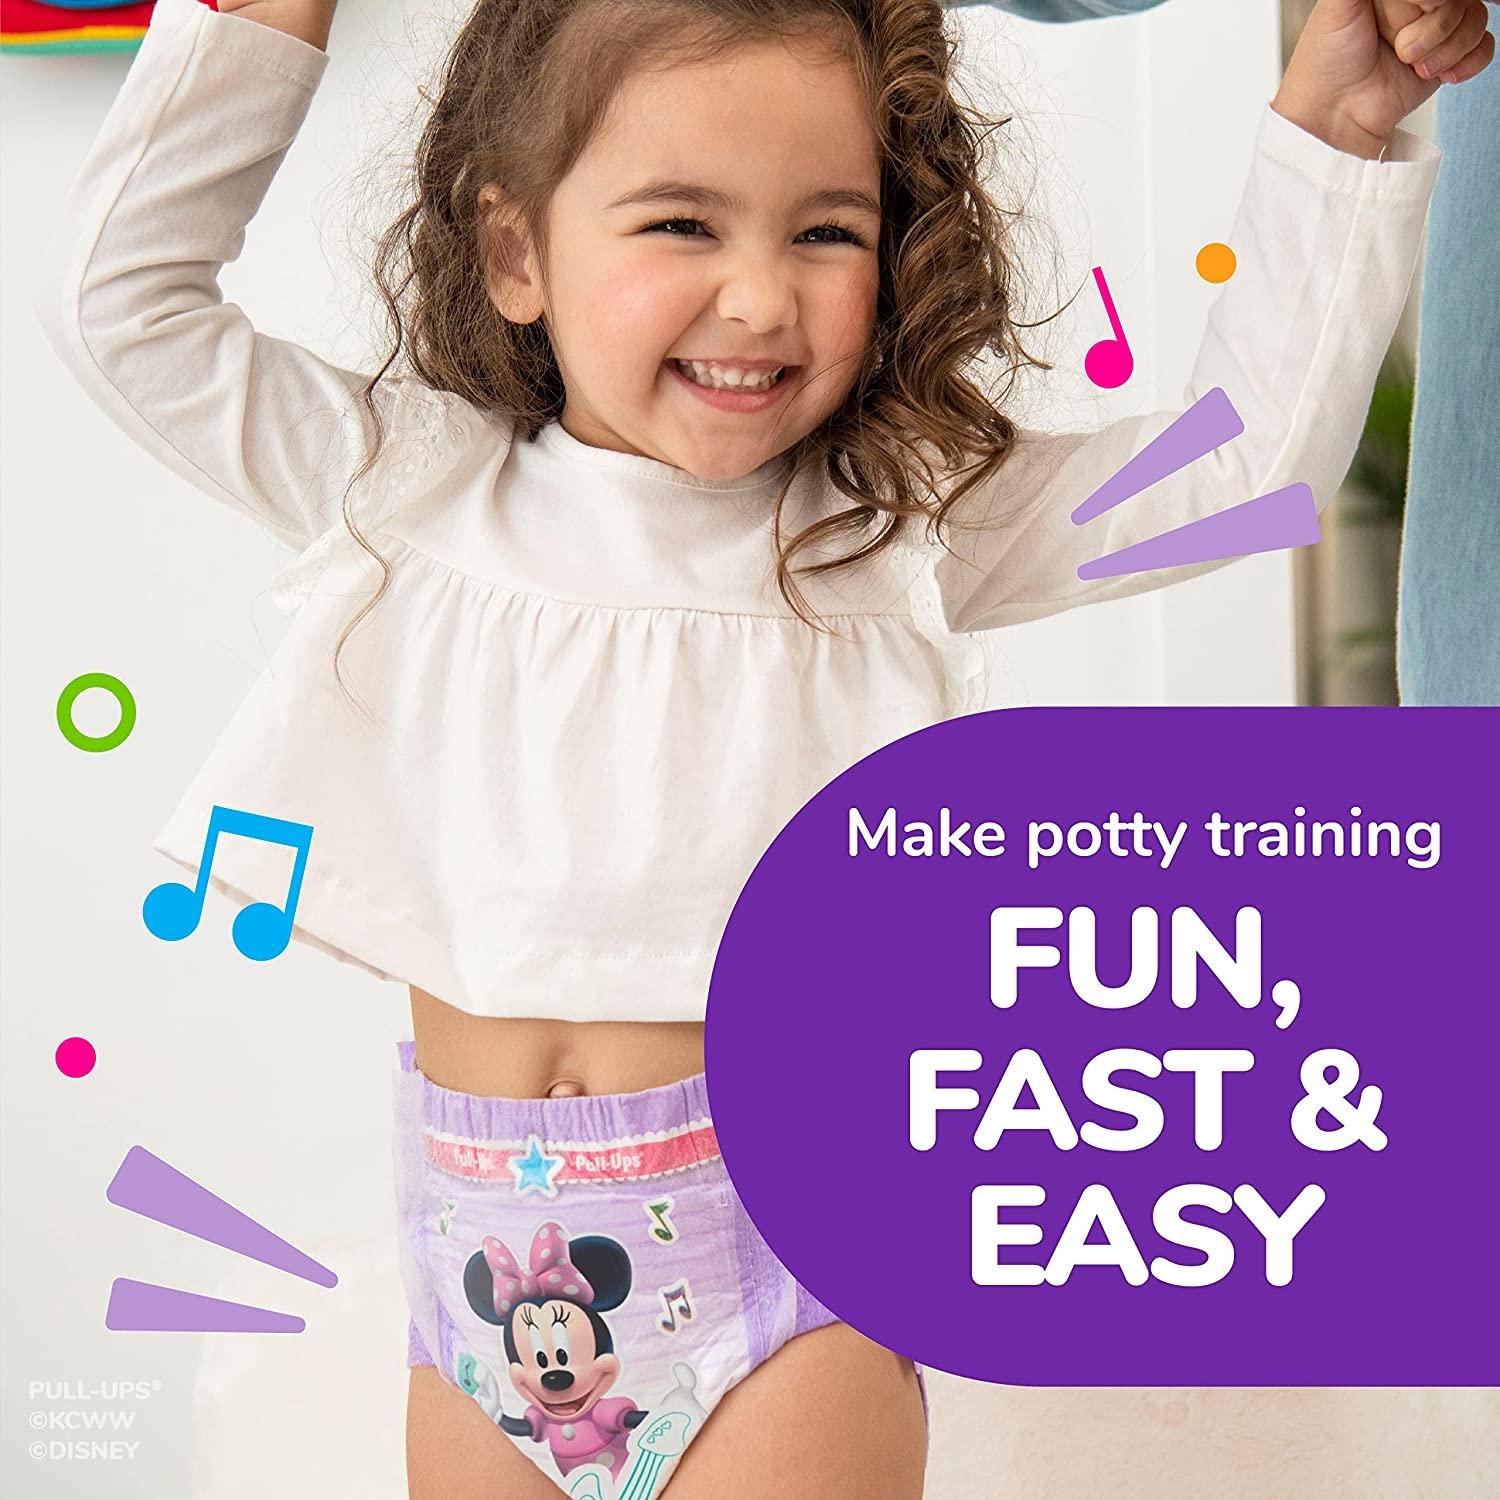 Pull Ups Potty Training Underwear for Girls Size 5 3T-4T - 20 CT